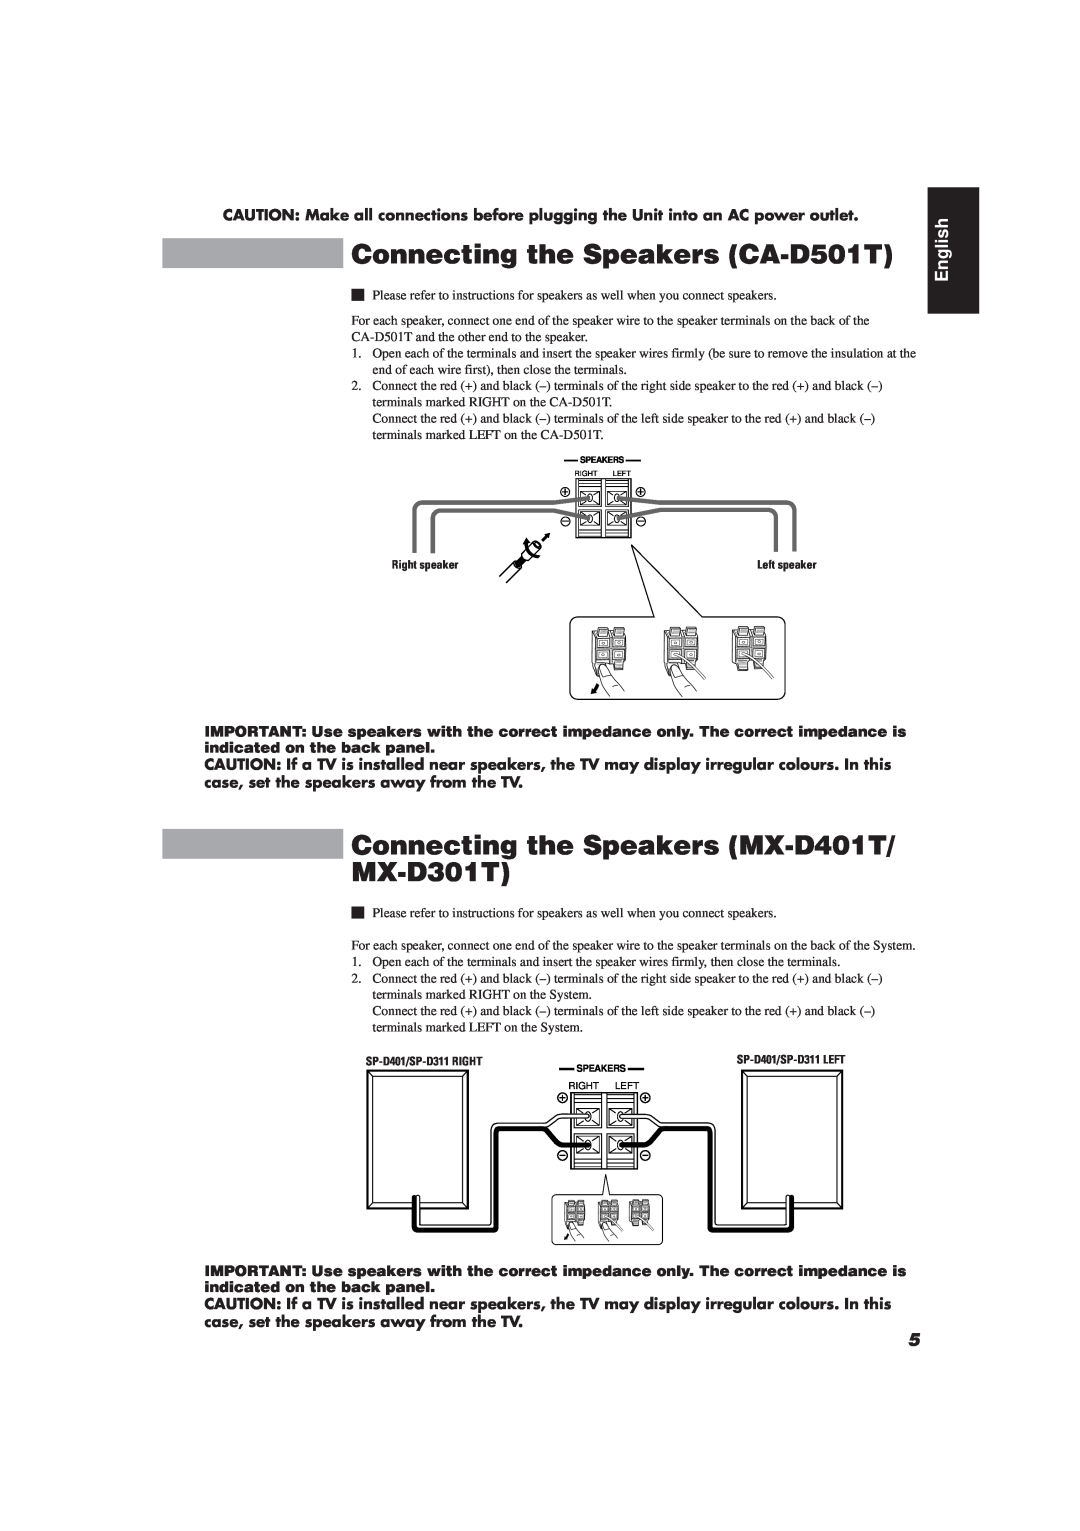 JVC manual Connecting the Speakers CA-D501T, Connecting the Speakers MX-D401T/ MX-D301T, English 